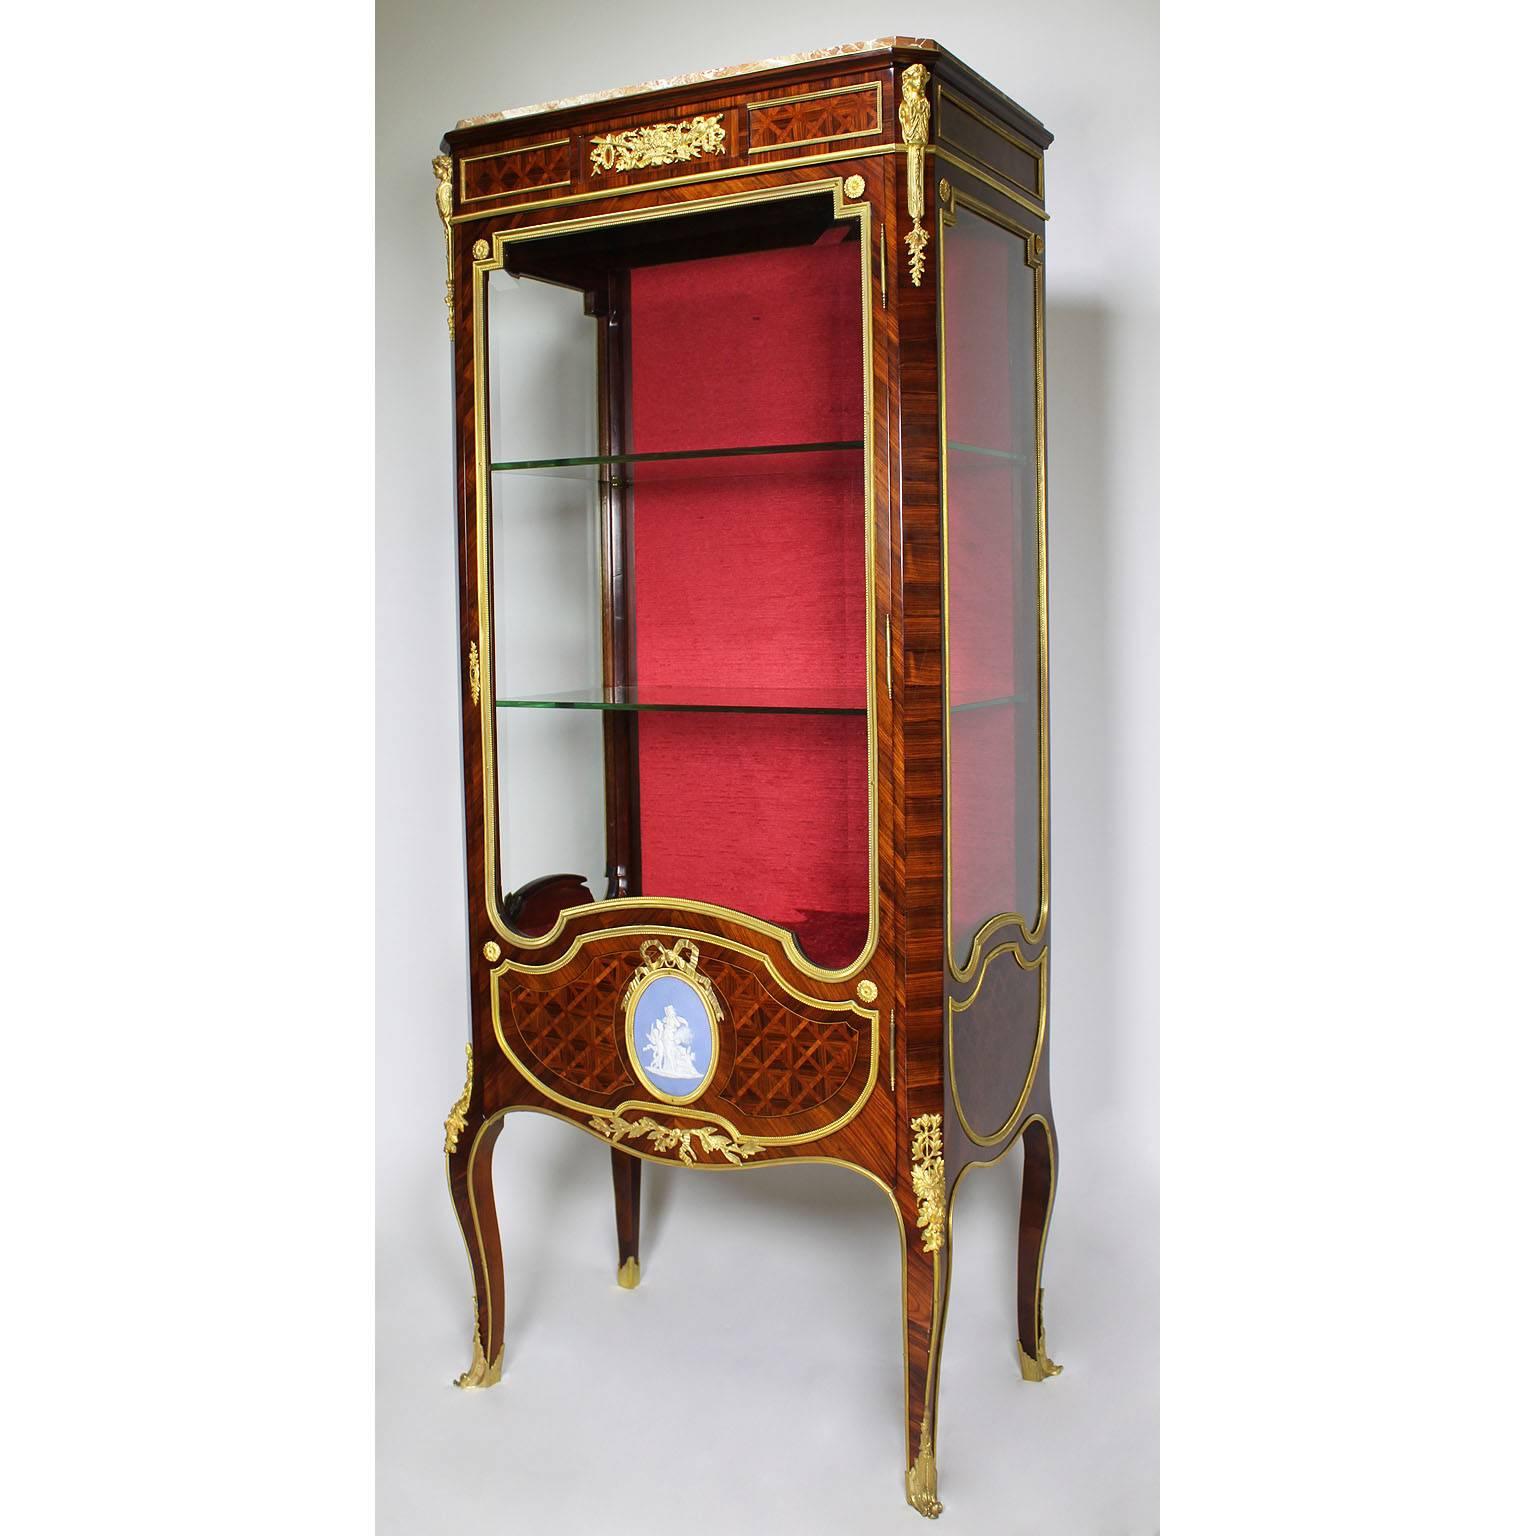 A very fine French Louis XV style ormolu and jasperware-mounted mahogany single door vitrine, attributed to François Linke (1855-1946). The two upper front corners surmounted with ormolu figures of females and centred with an ormolu allegrical